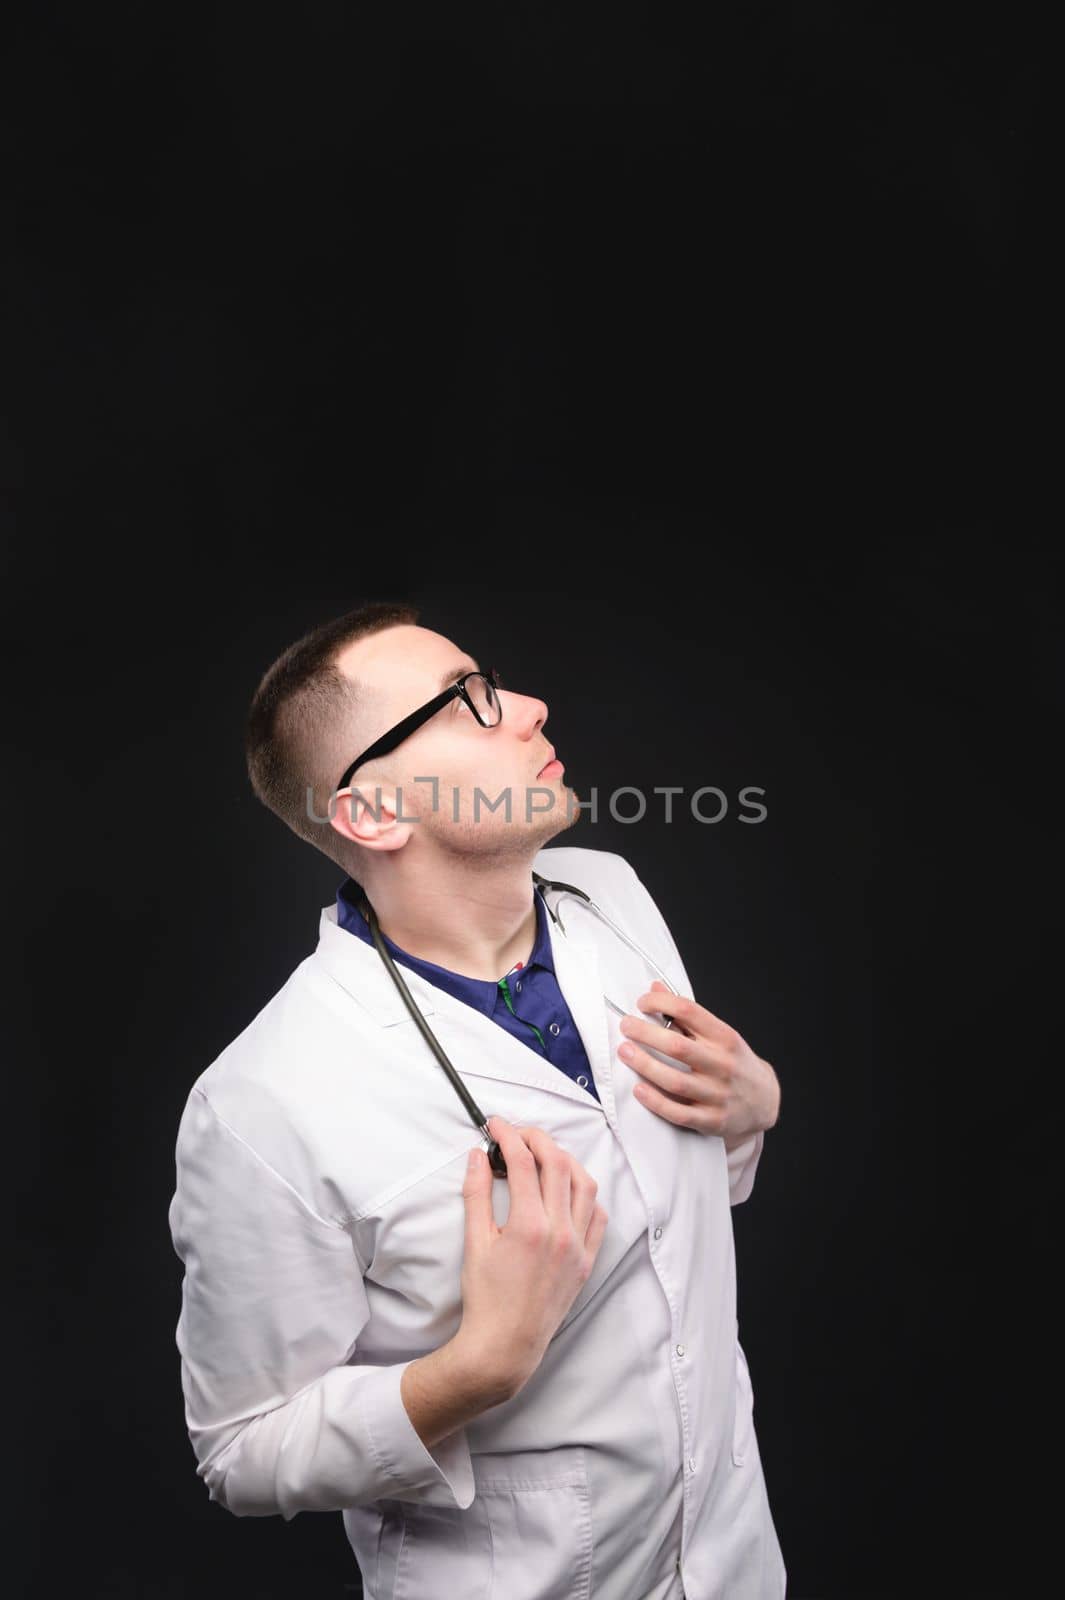 Portrait of a young and attractive doctor in uniform looking up. Concept of request or conversation, dialog box, advertising space.